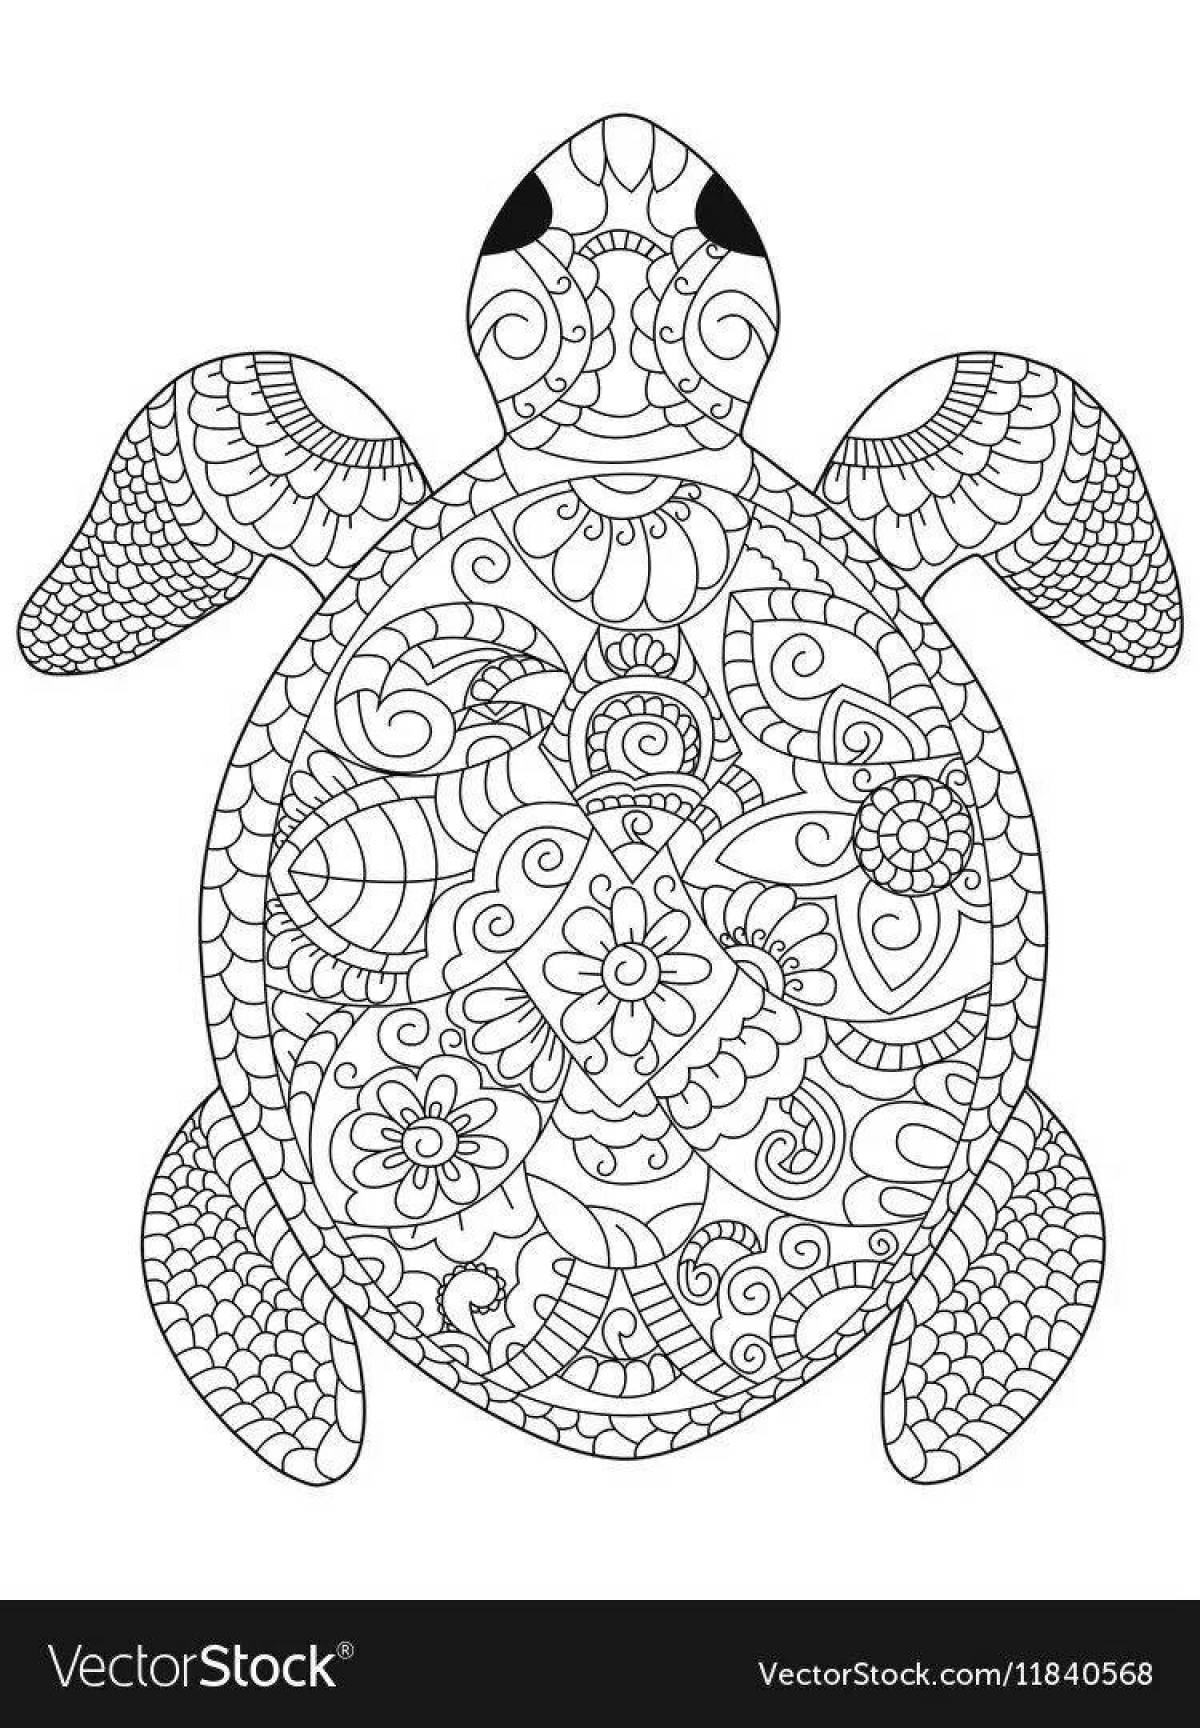 Adorable anti-stress turtle coloring book